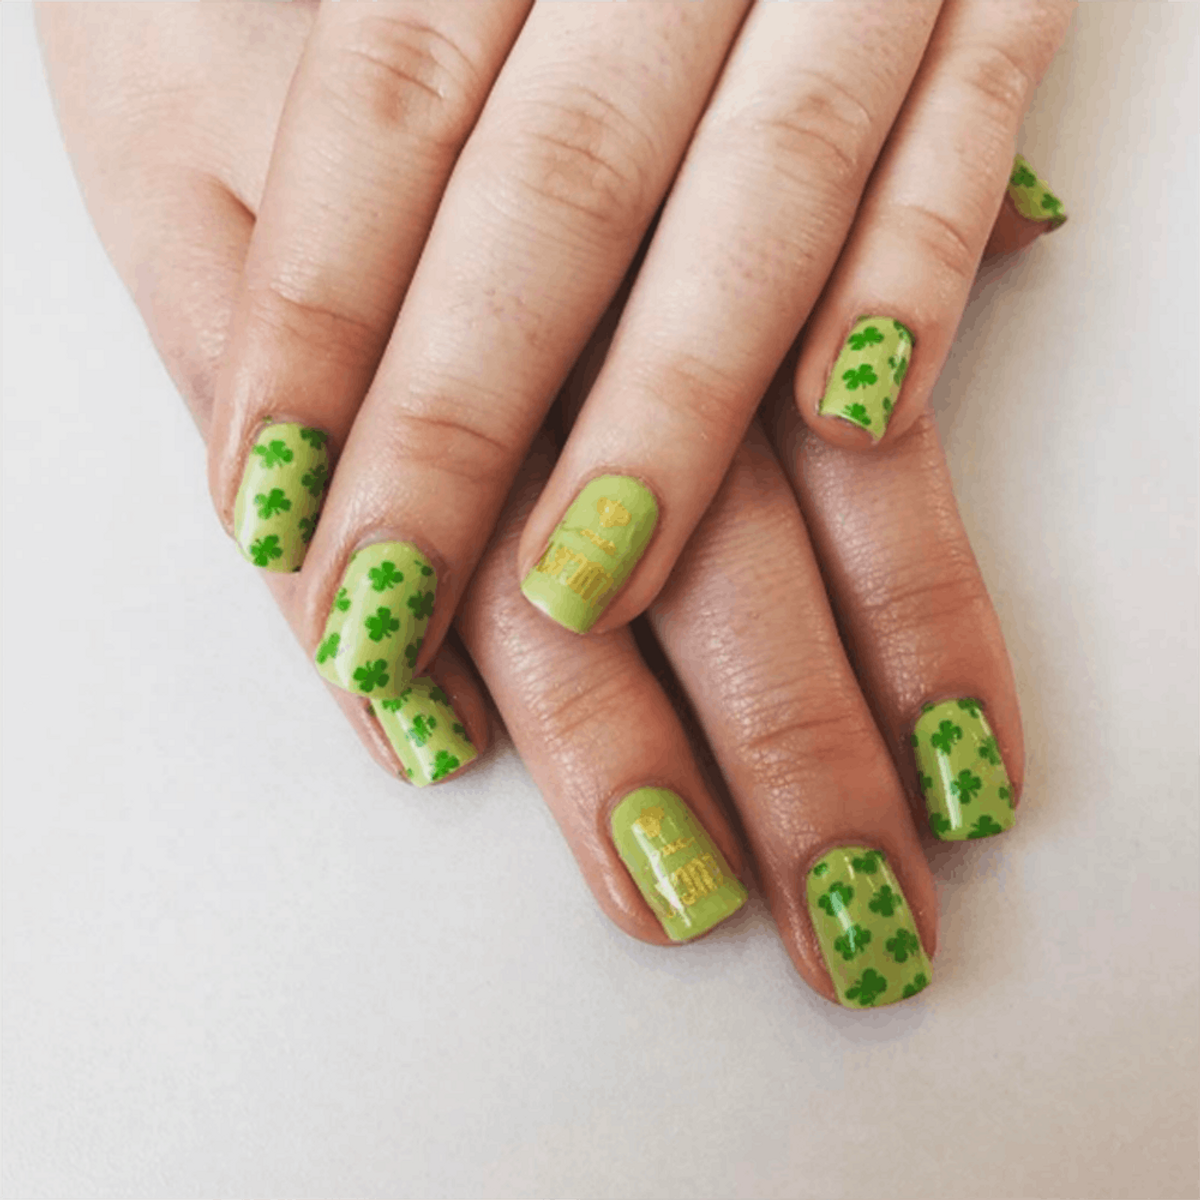 8 St. Patrick’s Day Nail Art Ideas That Will Give You All the Luck You Need